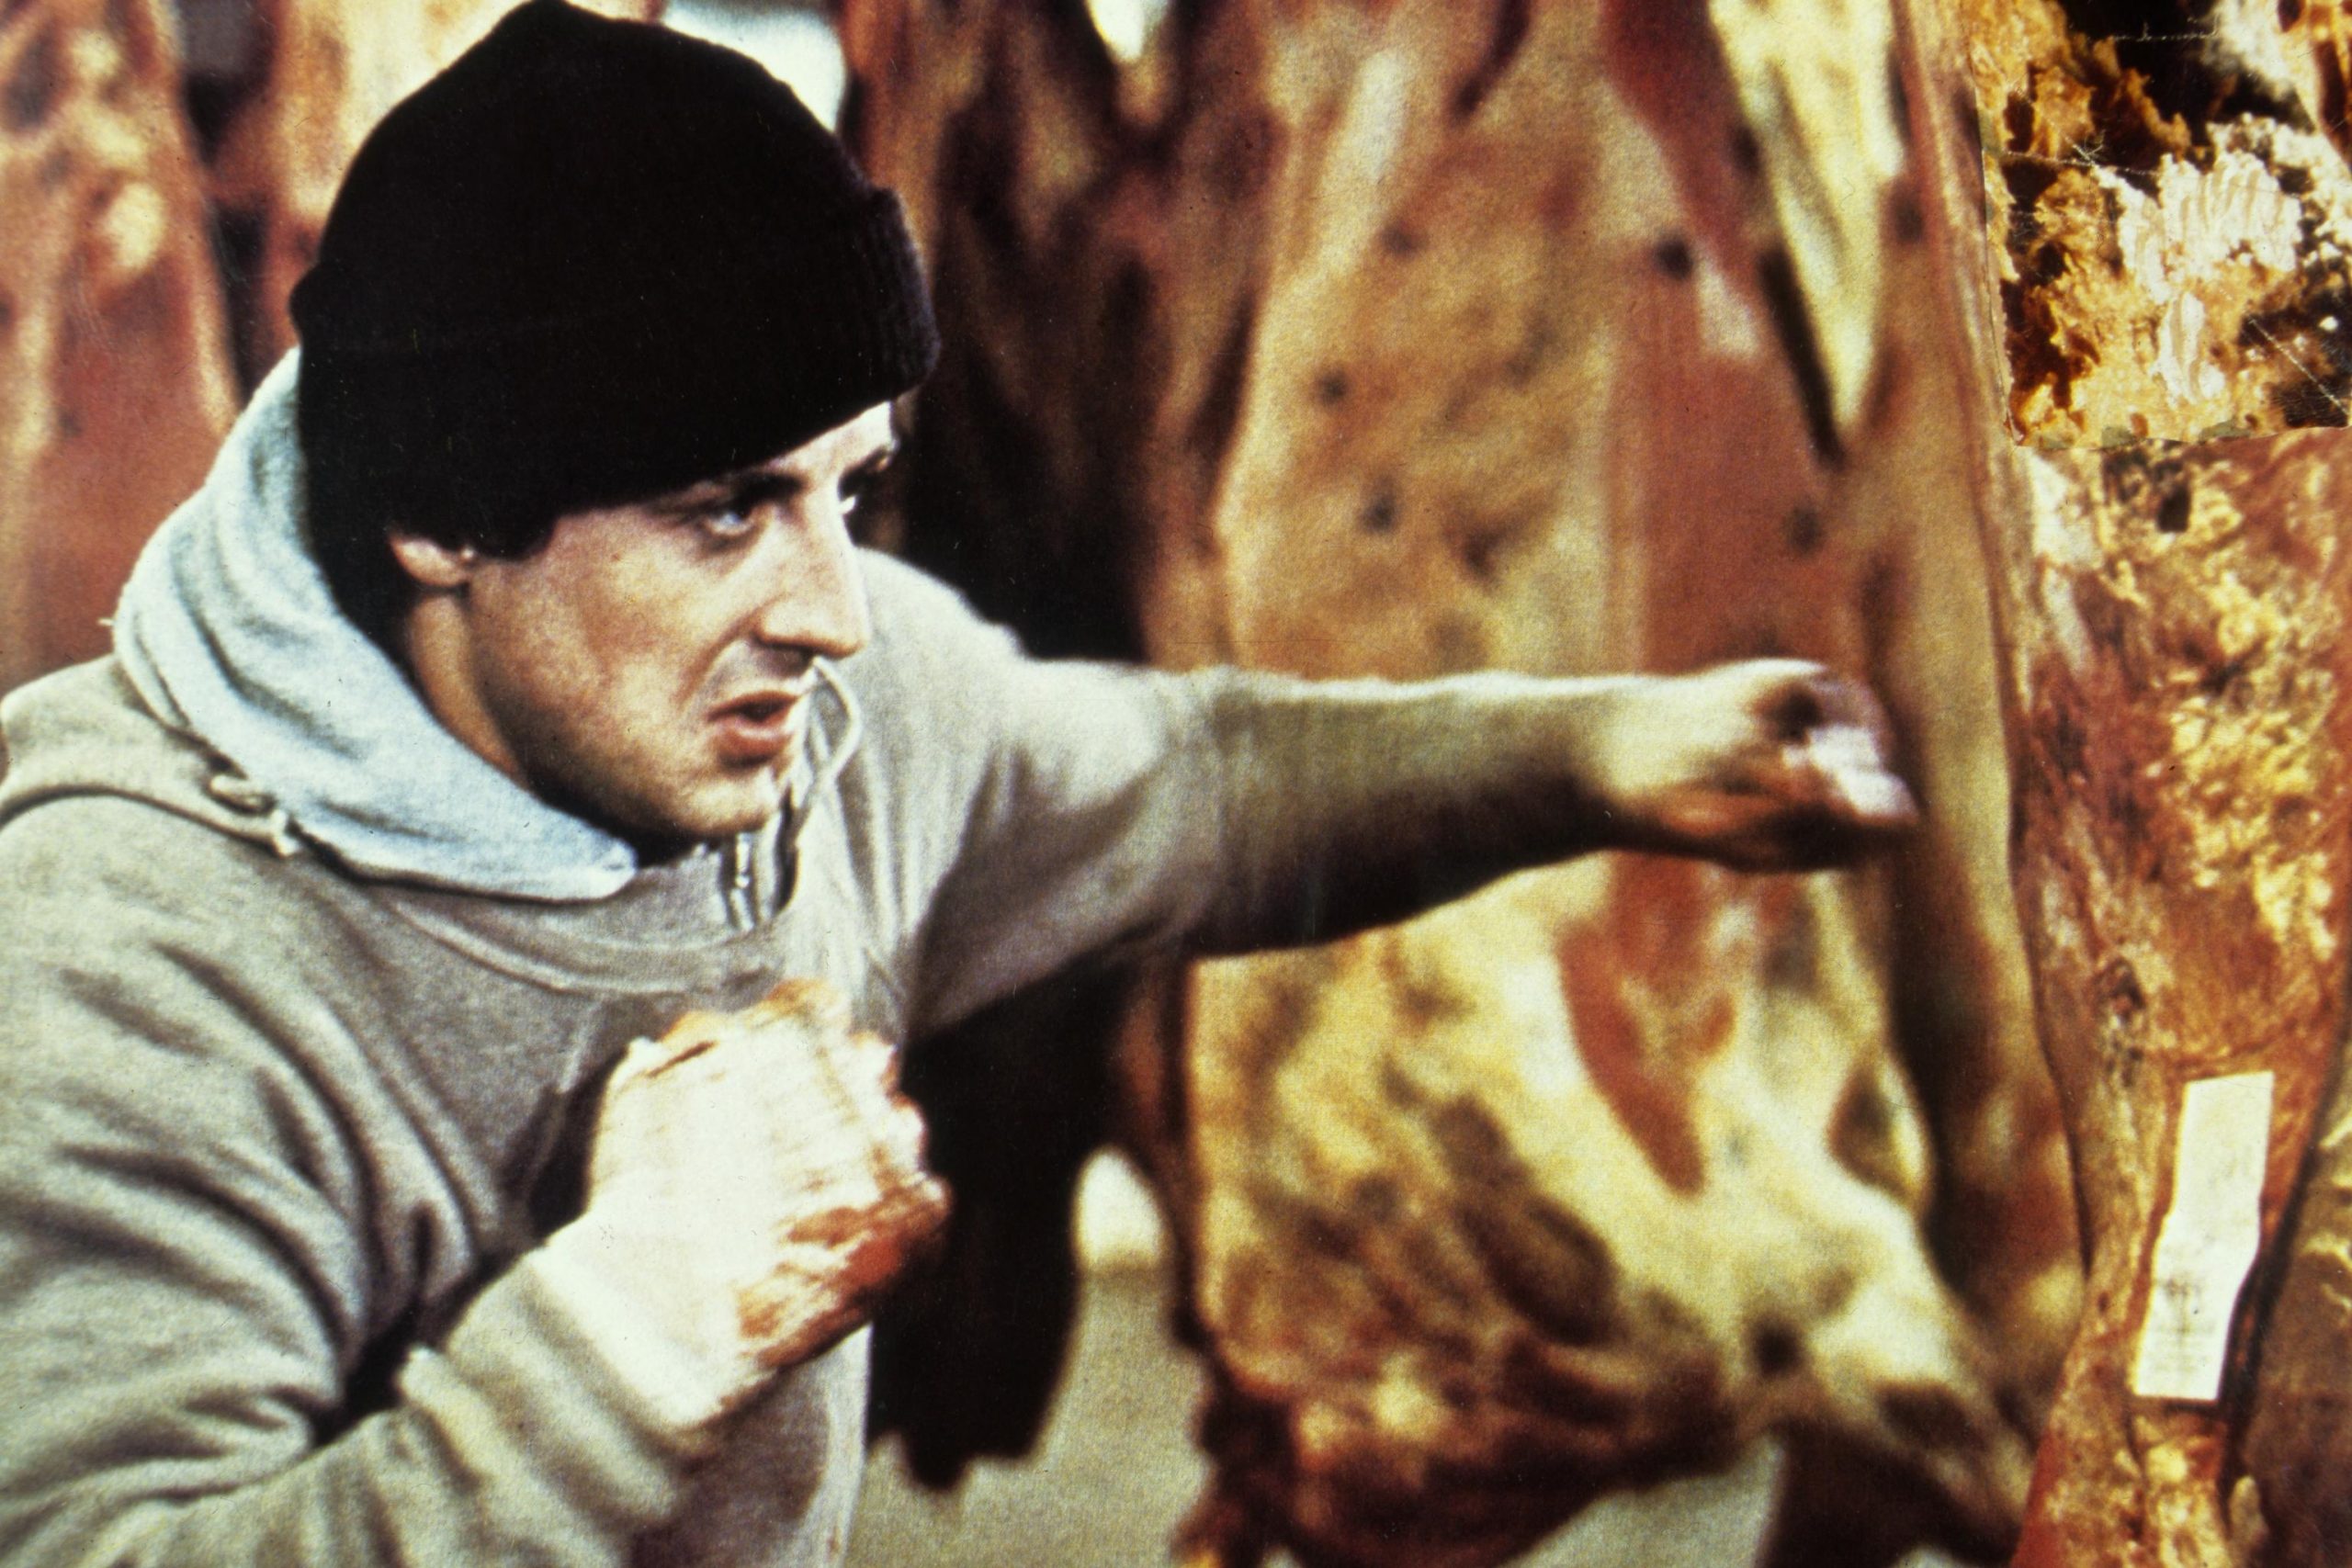 'Rocky' Documentary Narrated By Sylvester Stallone Coming Straight To Video-On-Demand